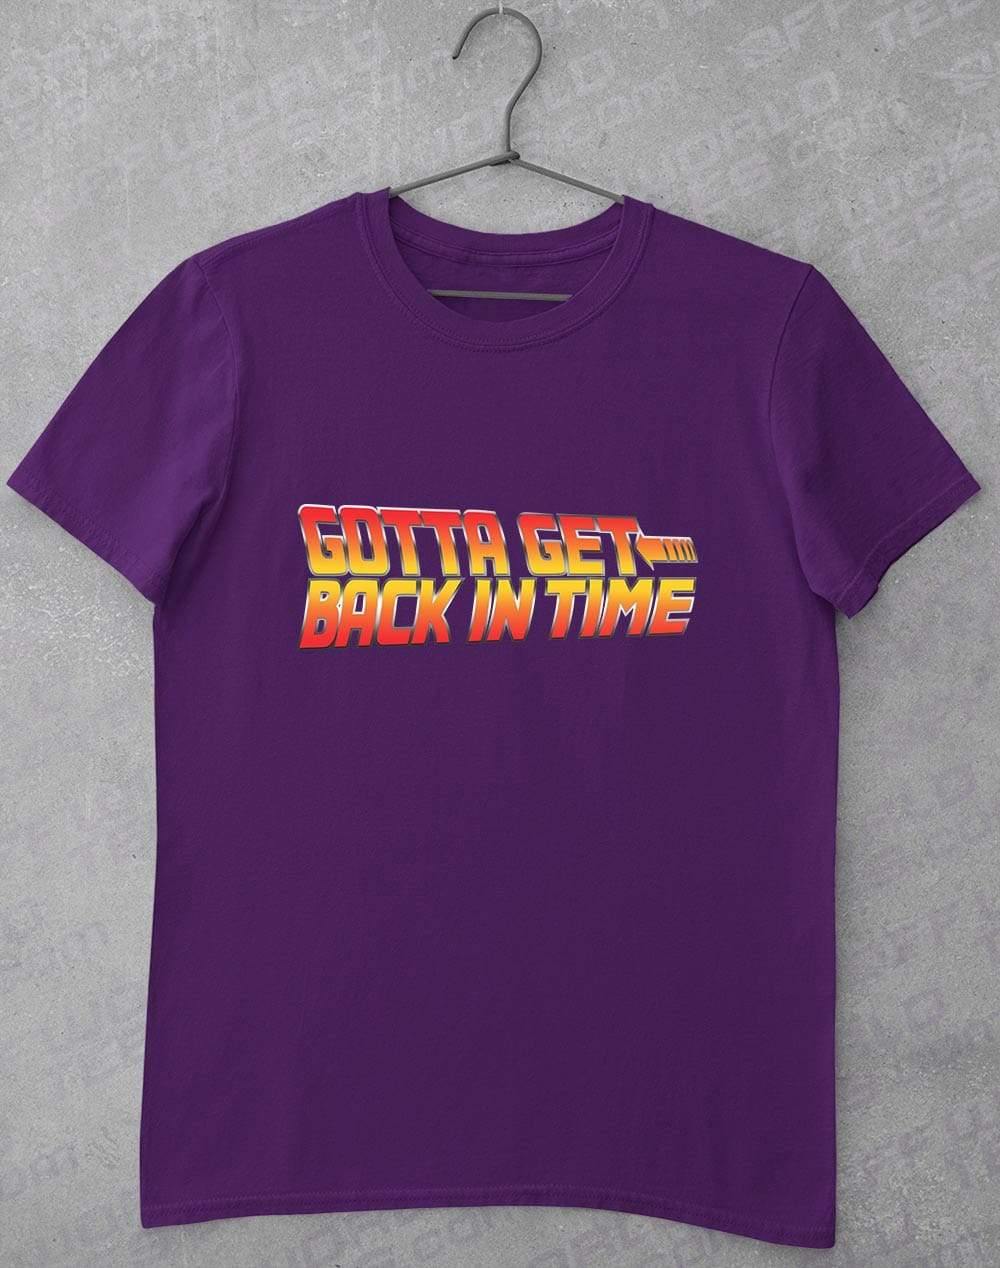 Back in Time T-Shirt S / Purple  - Off World Tees